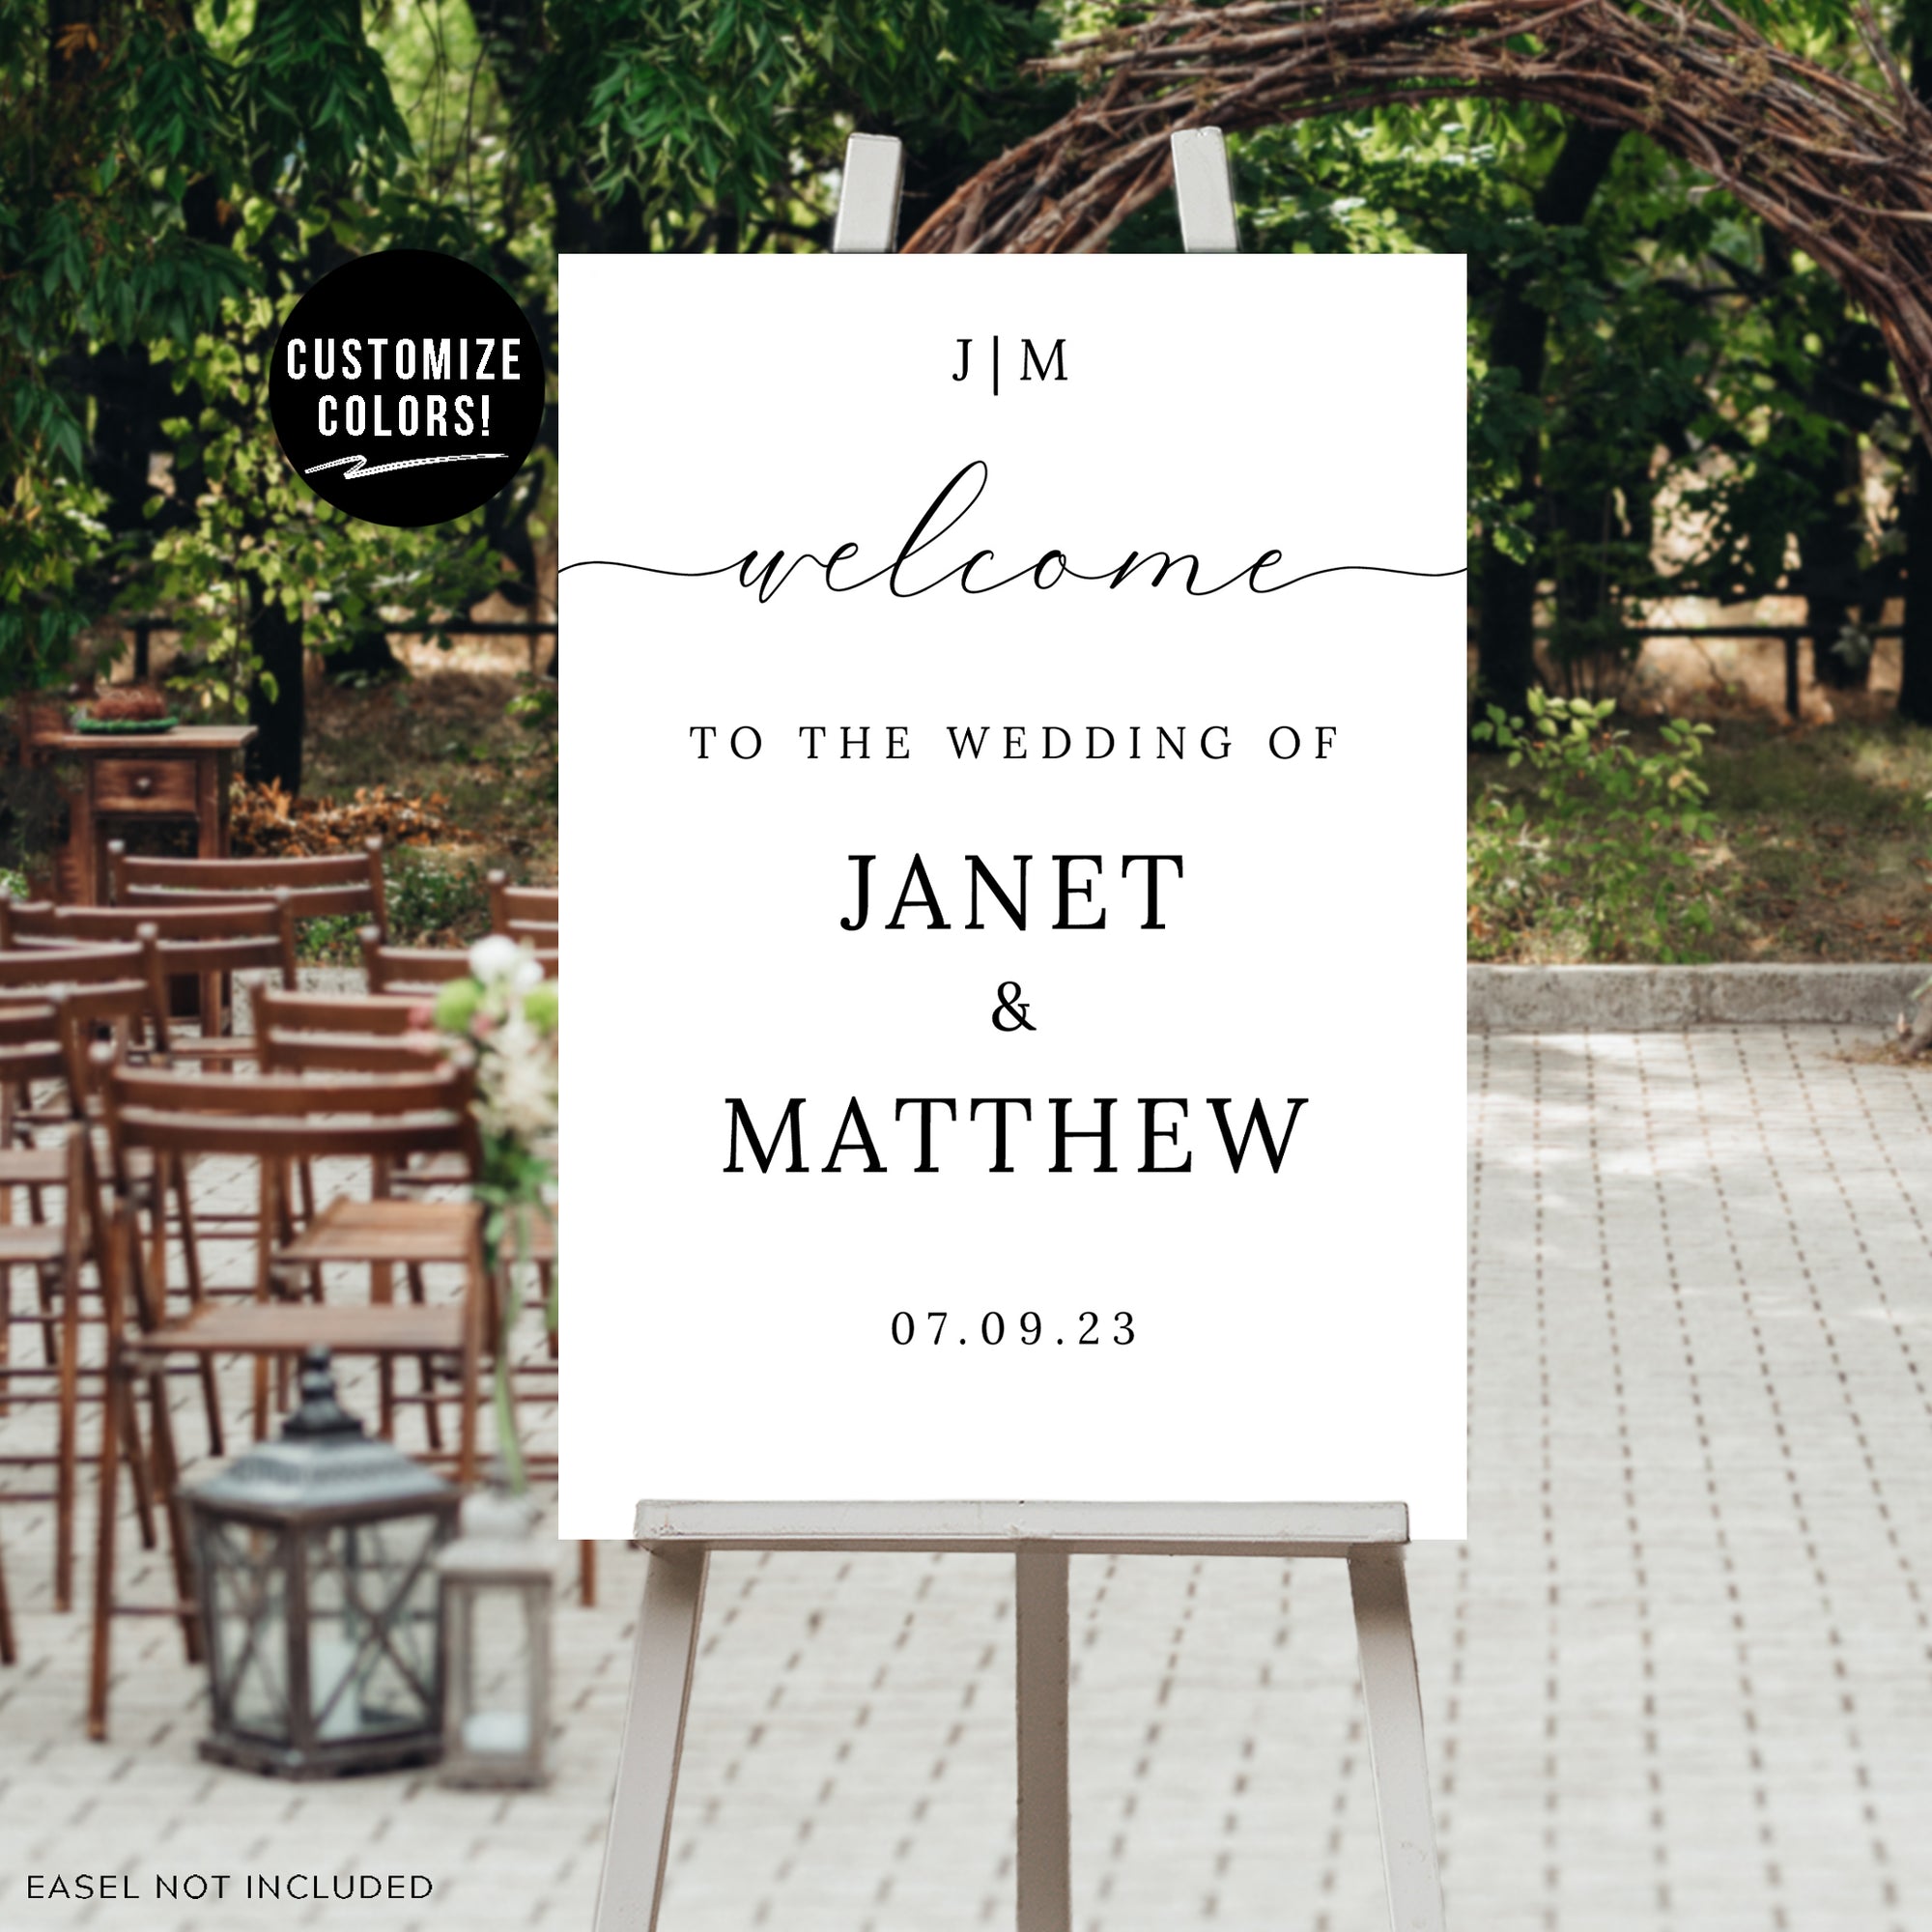 a welcome sign for a wedding with chairs in the background